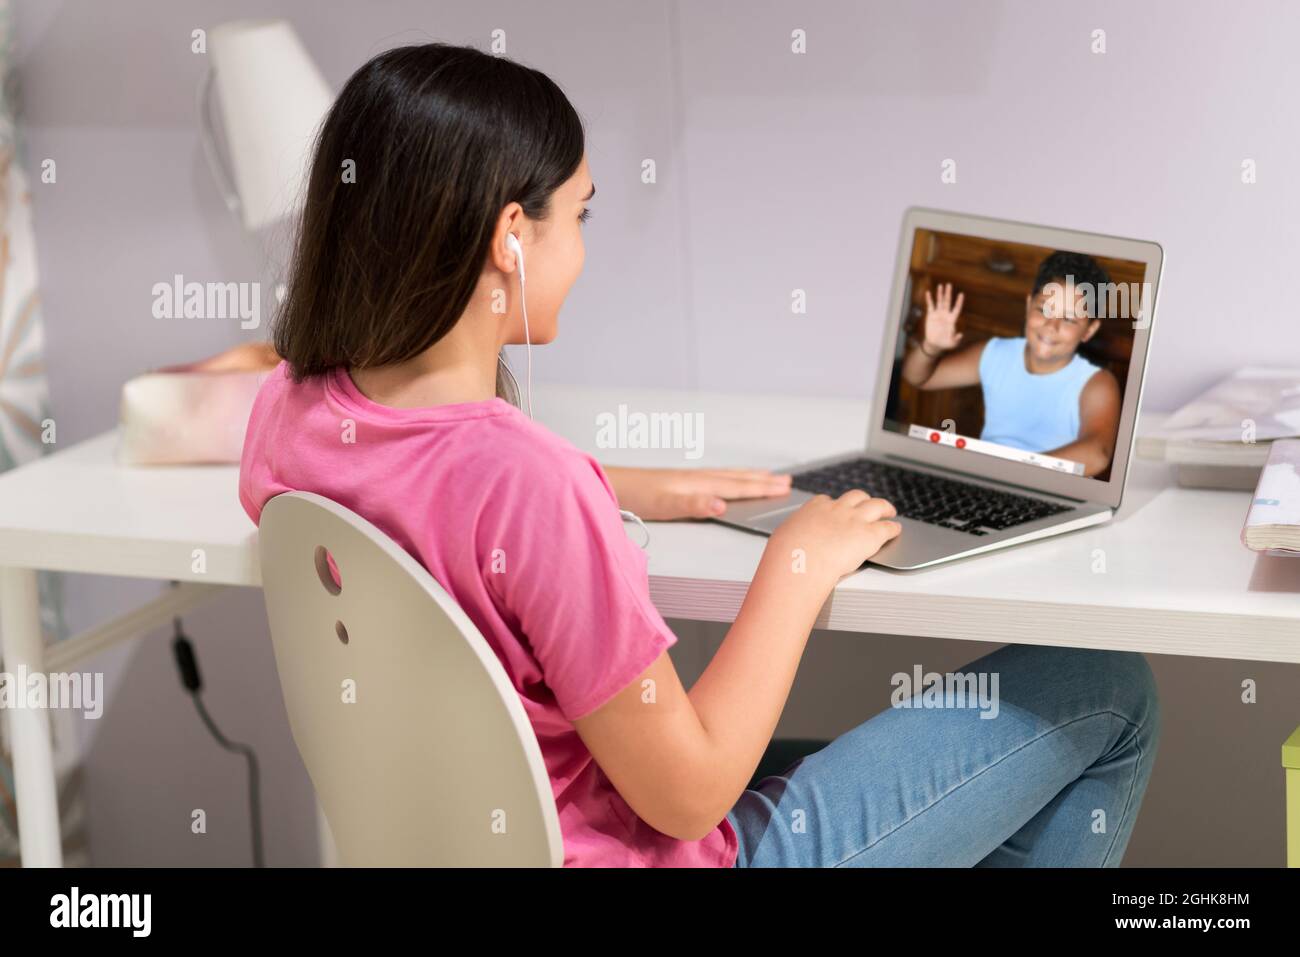 Side view of teen girl in earphones sitting at table and communicating via video chat app on laptop during social distancing period at home Stock Photo